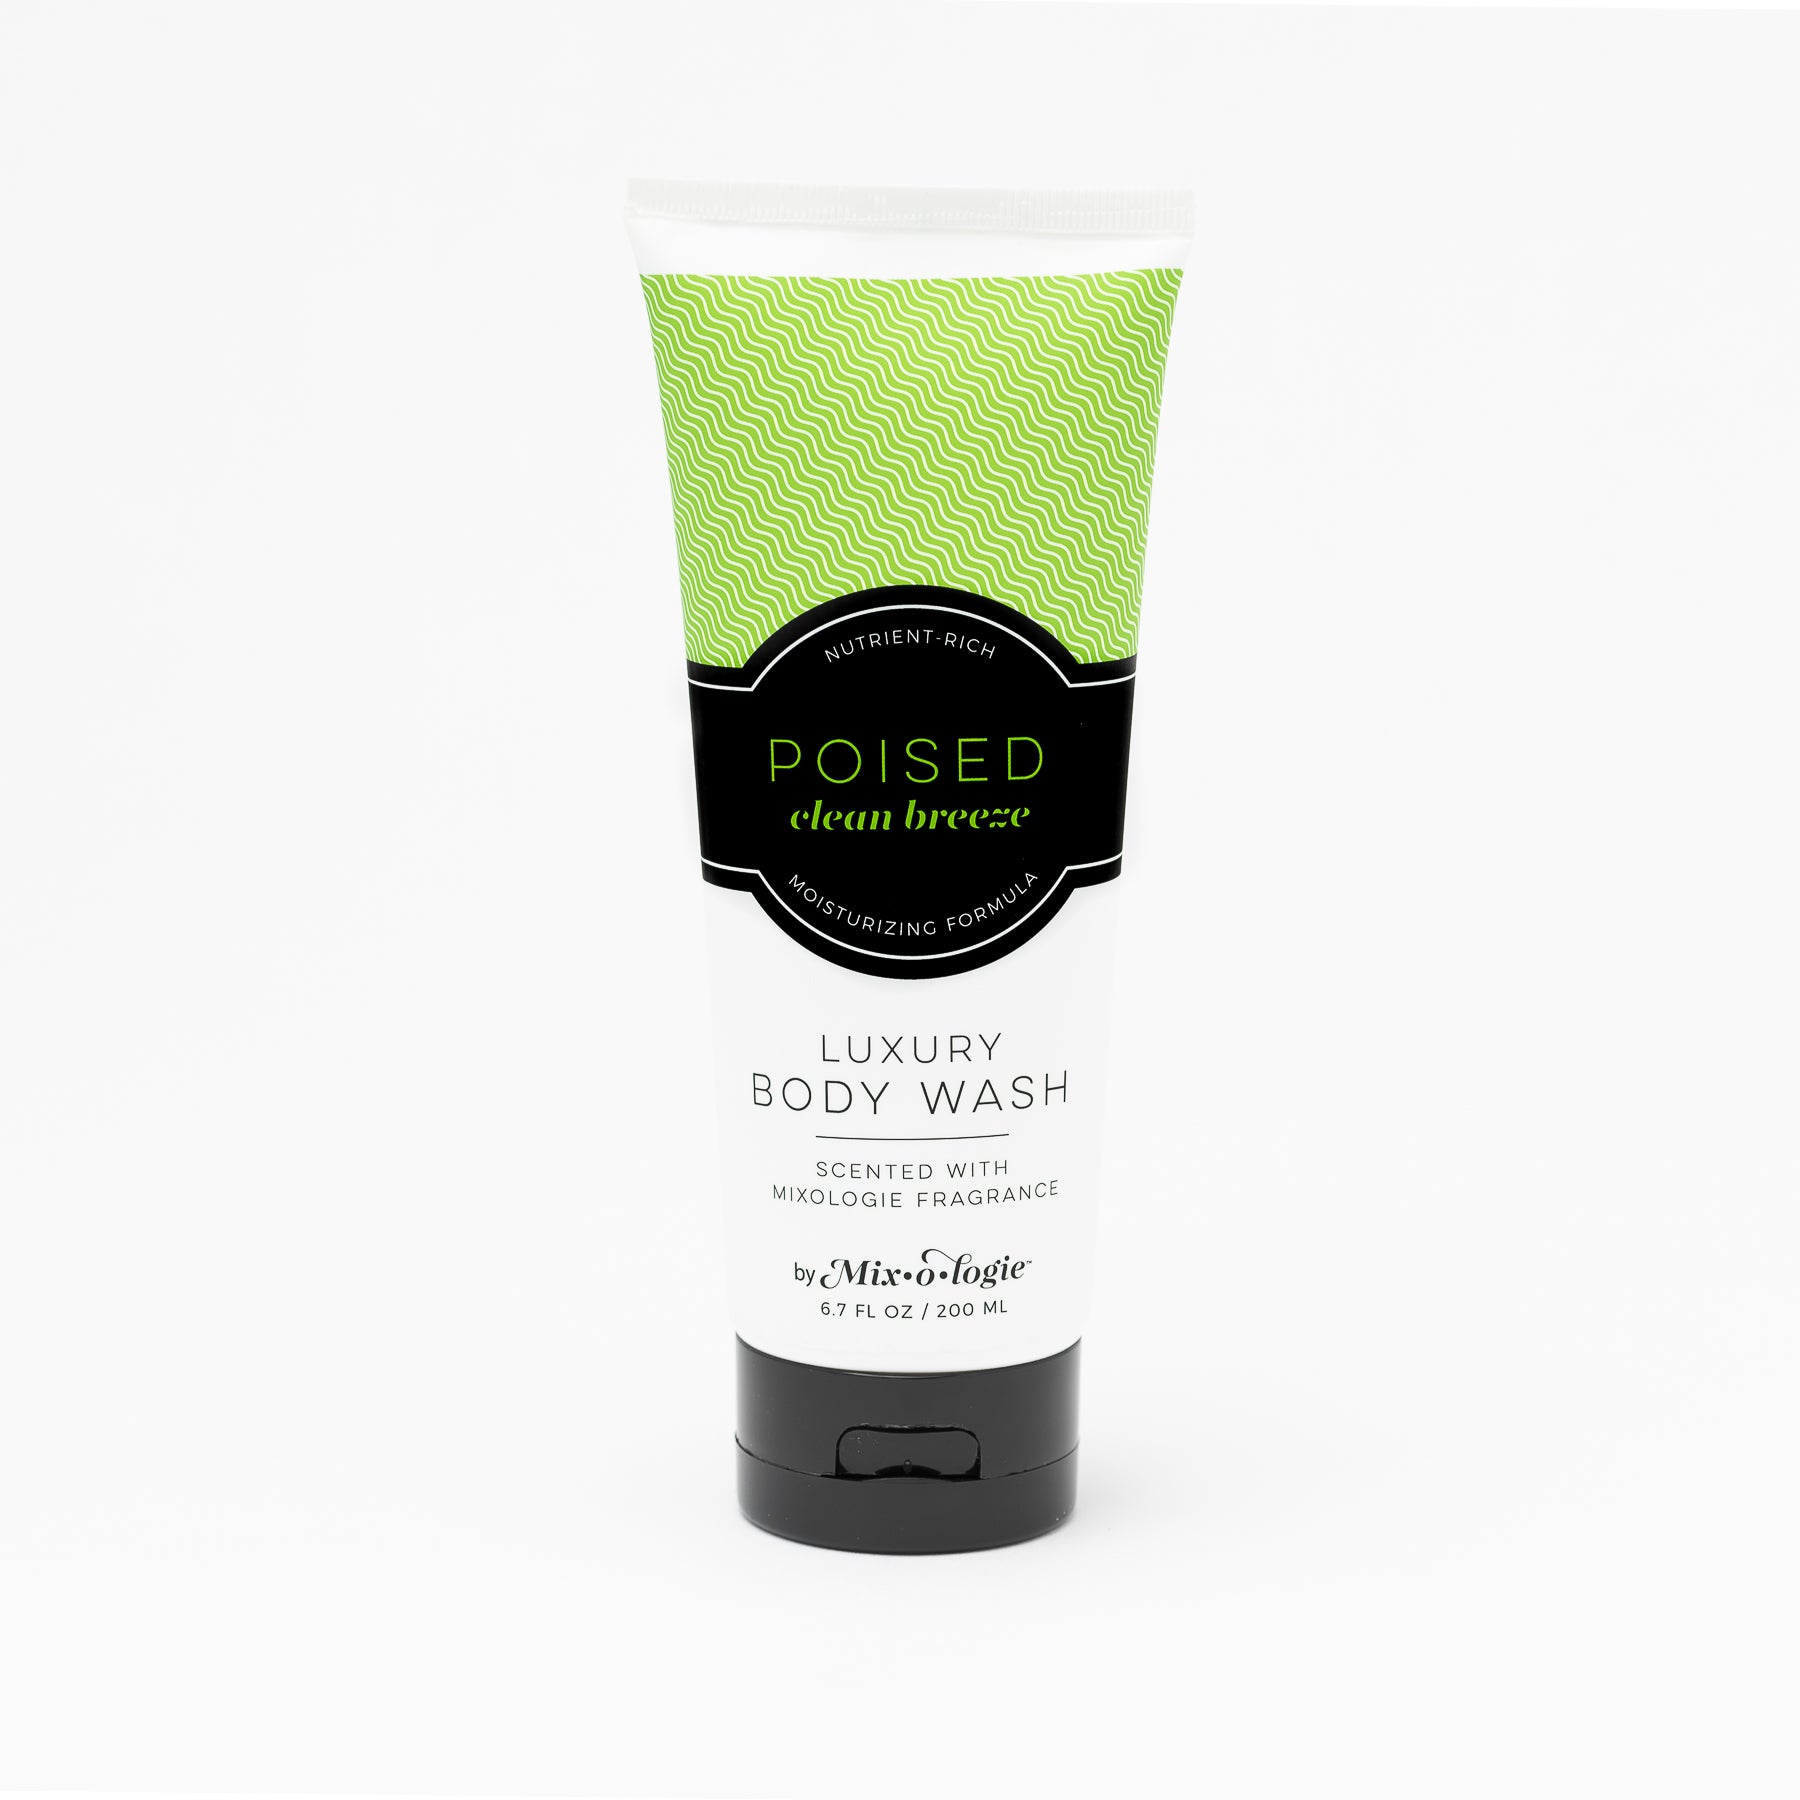 Luxury Body Wash of Poised (Clean Breeze) in light green pattern package and black label with white background.